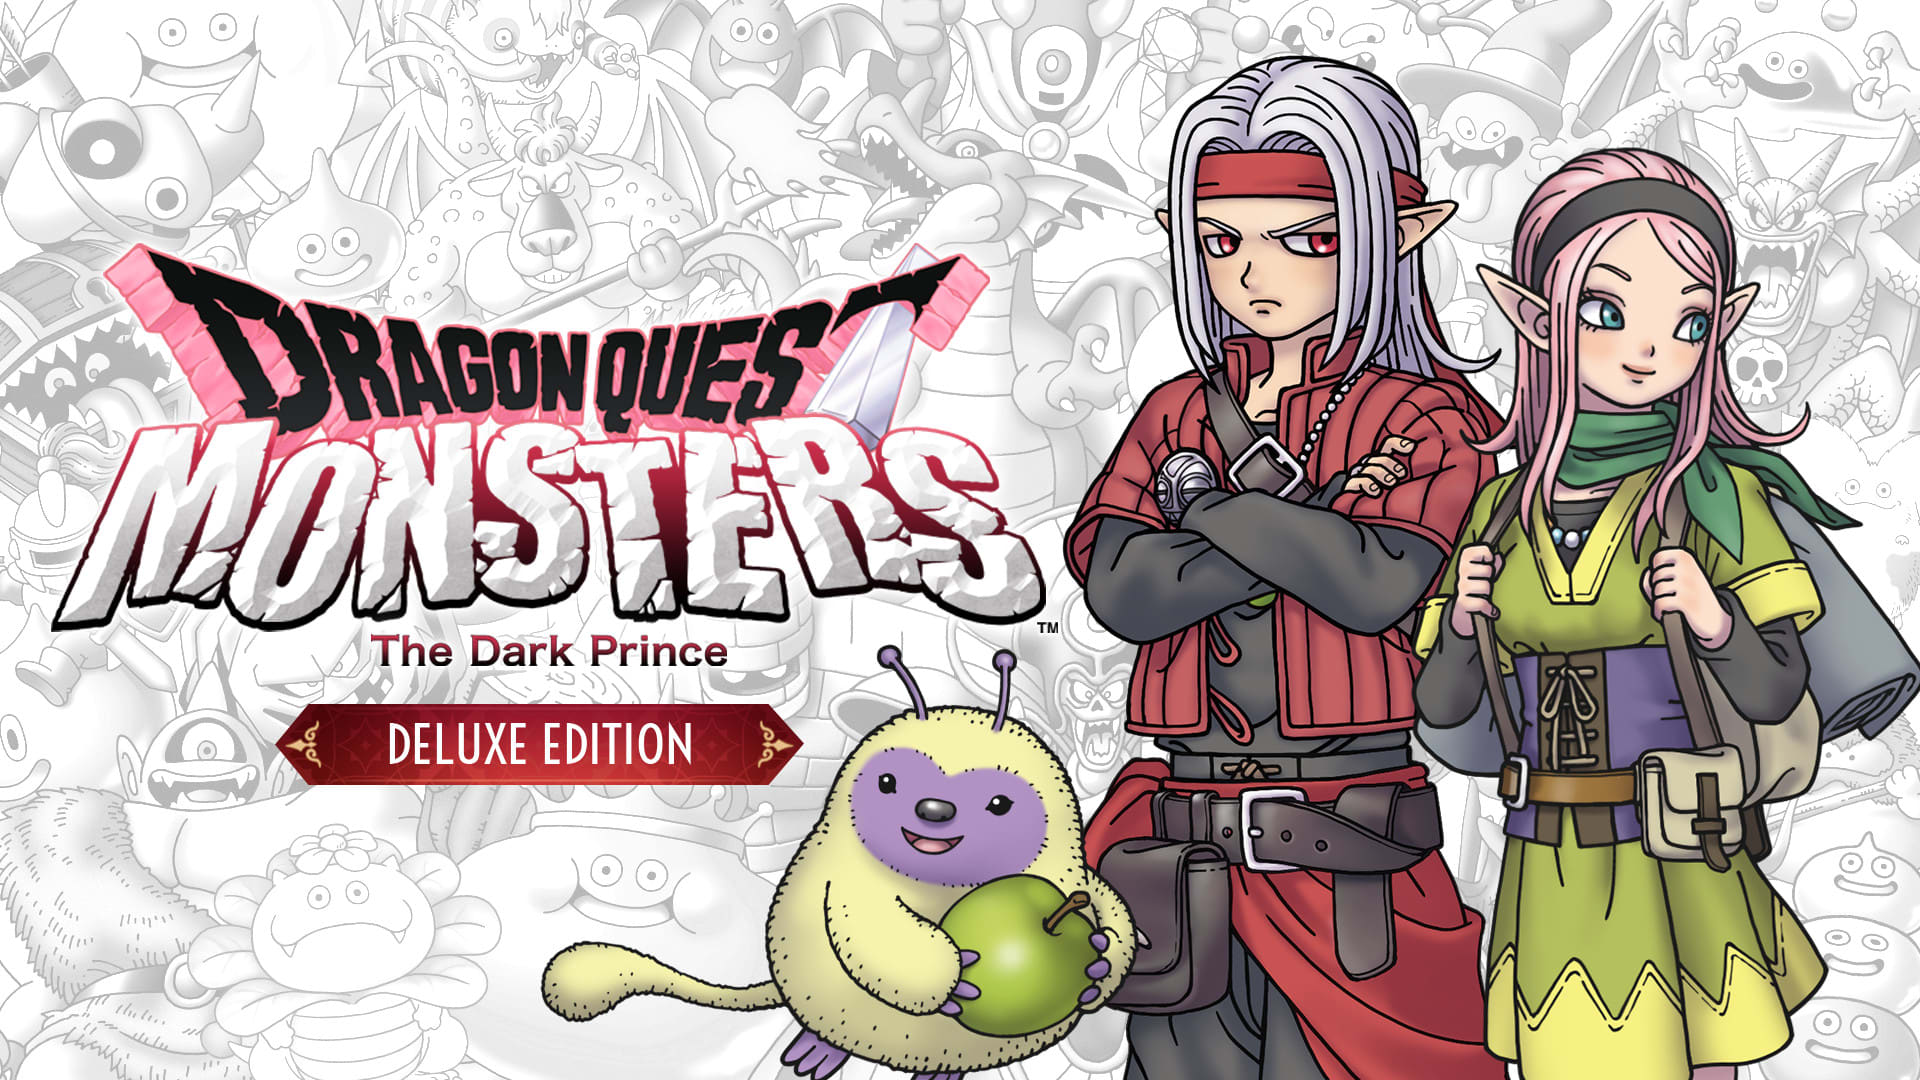 DRAGON QUEST MONSTERS: The Dark Prince Digital Deluxe Edition